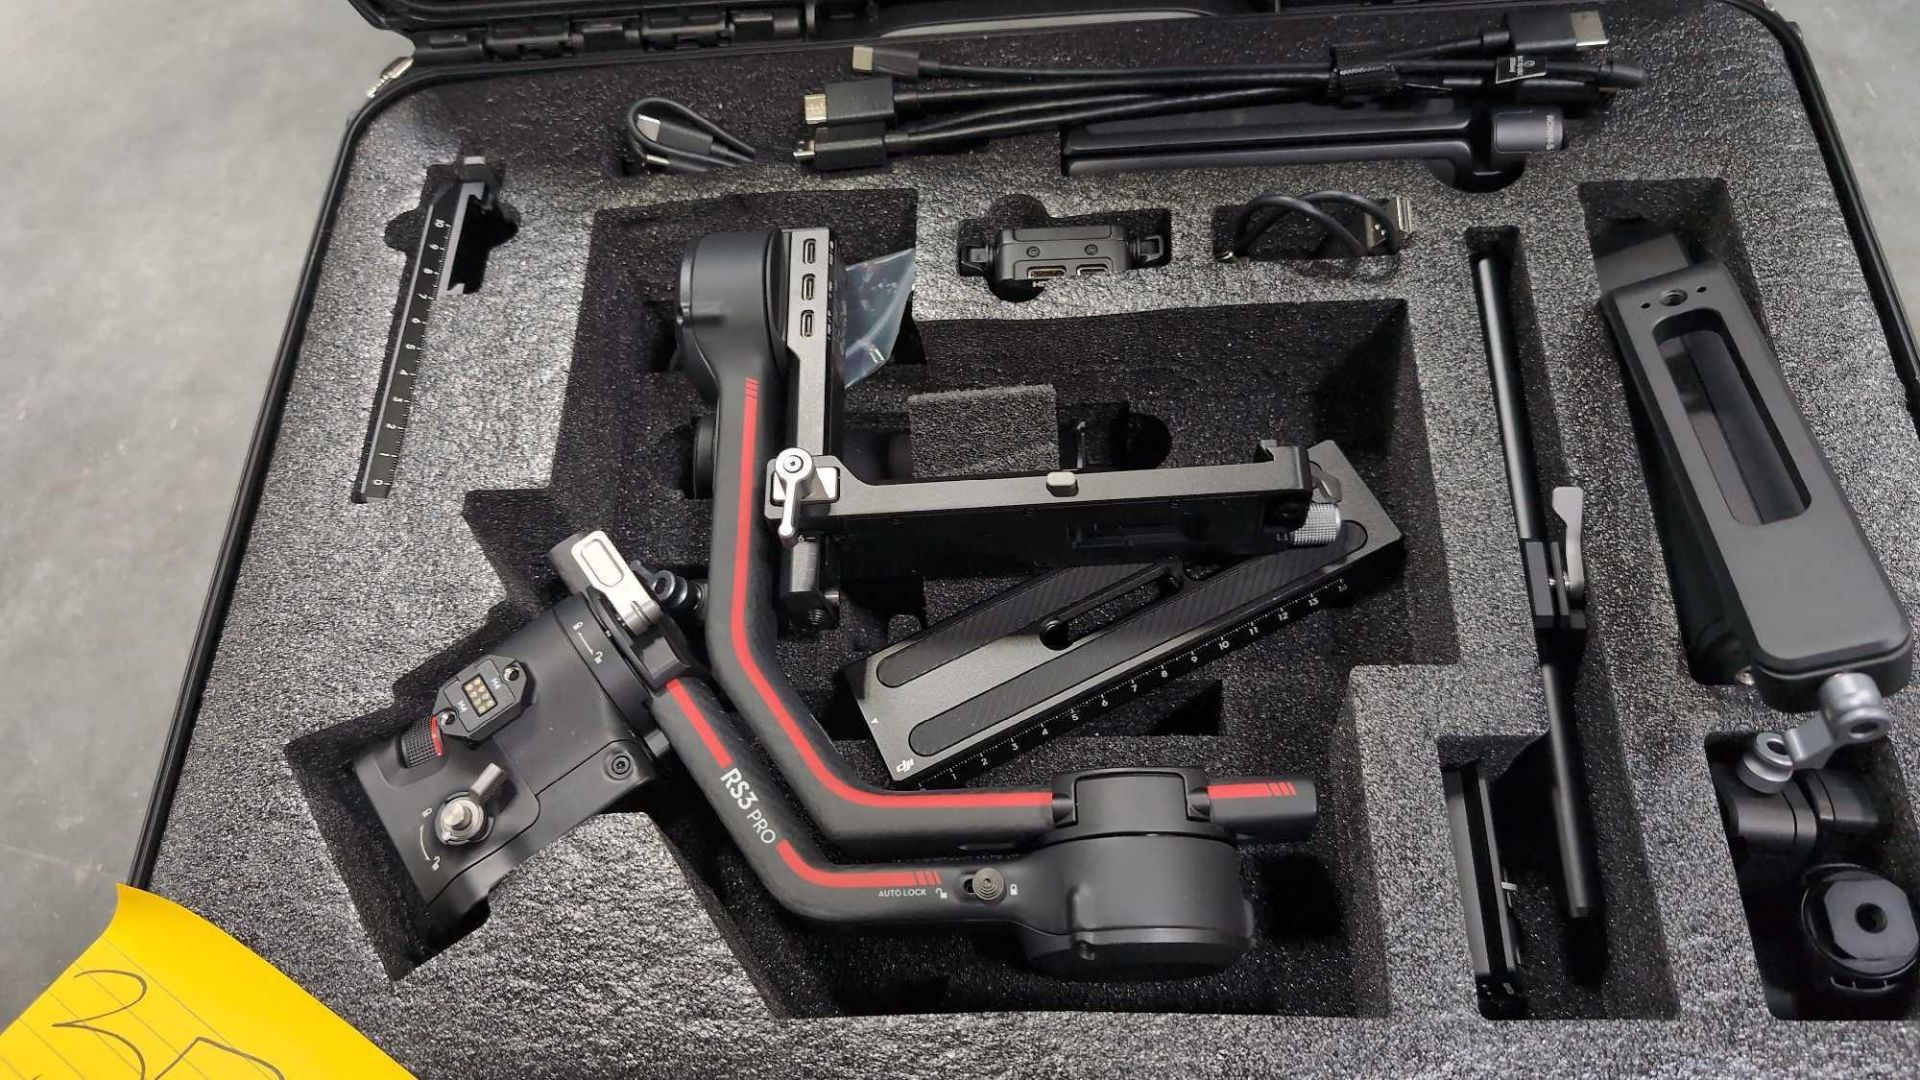 DJI Ronin rs3 pro with case - Image 2 of 4